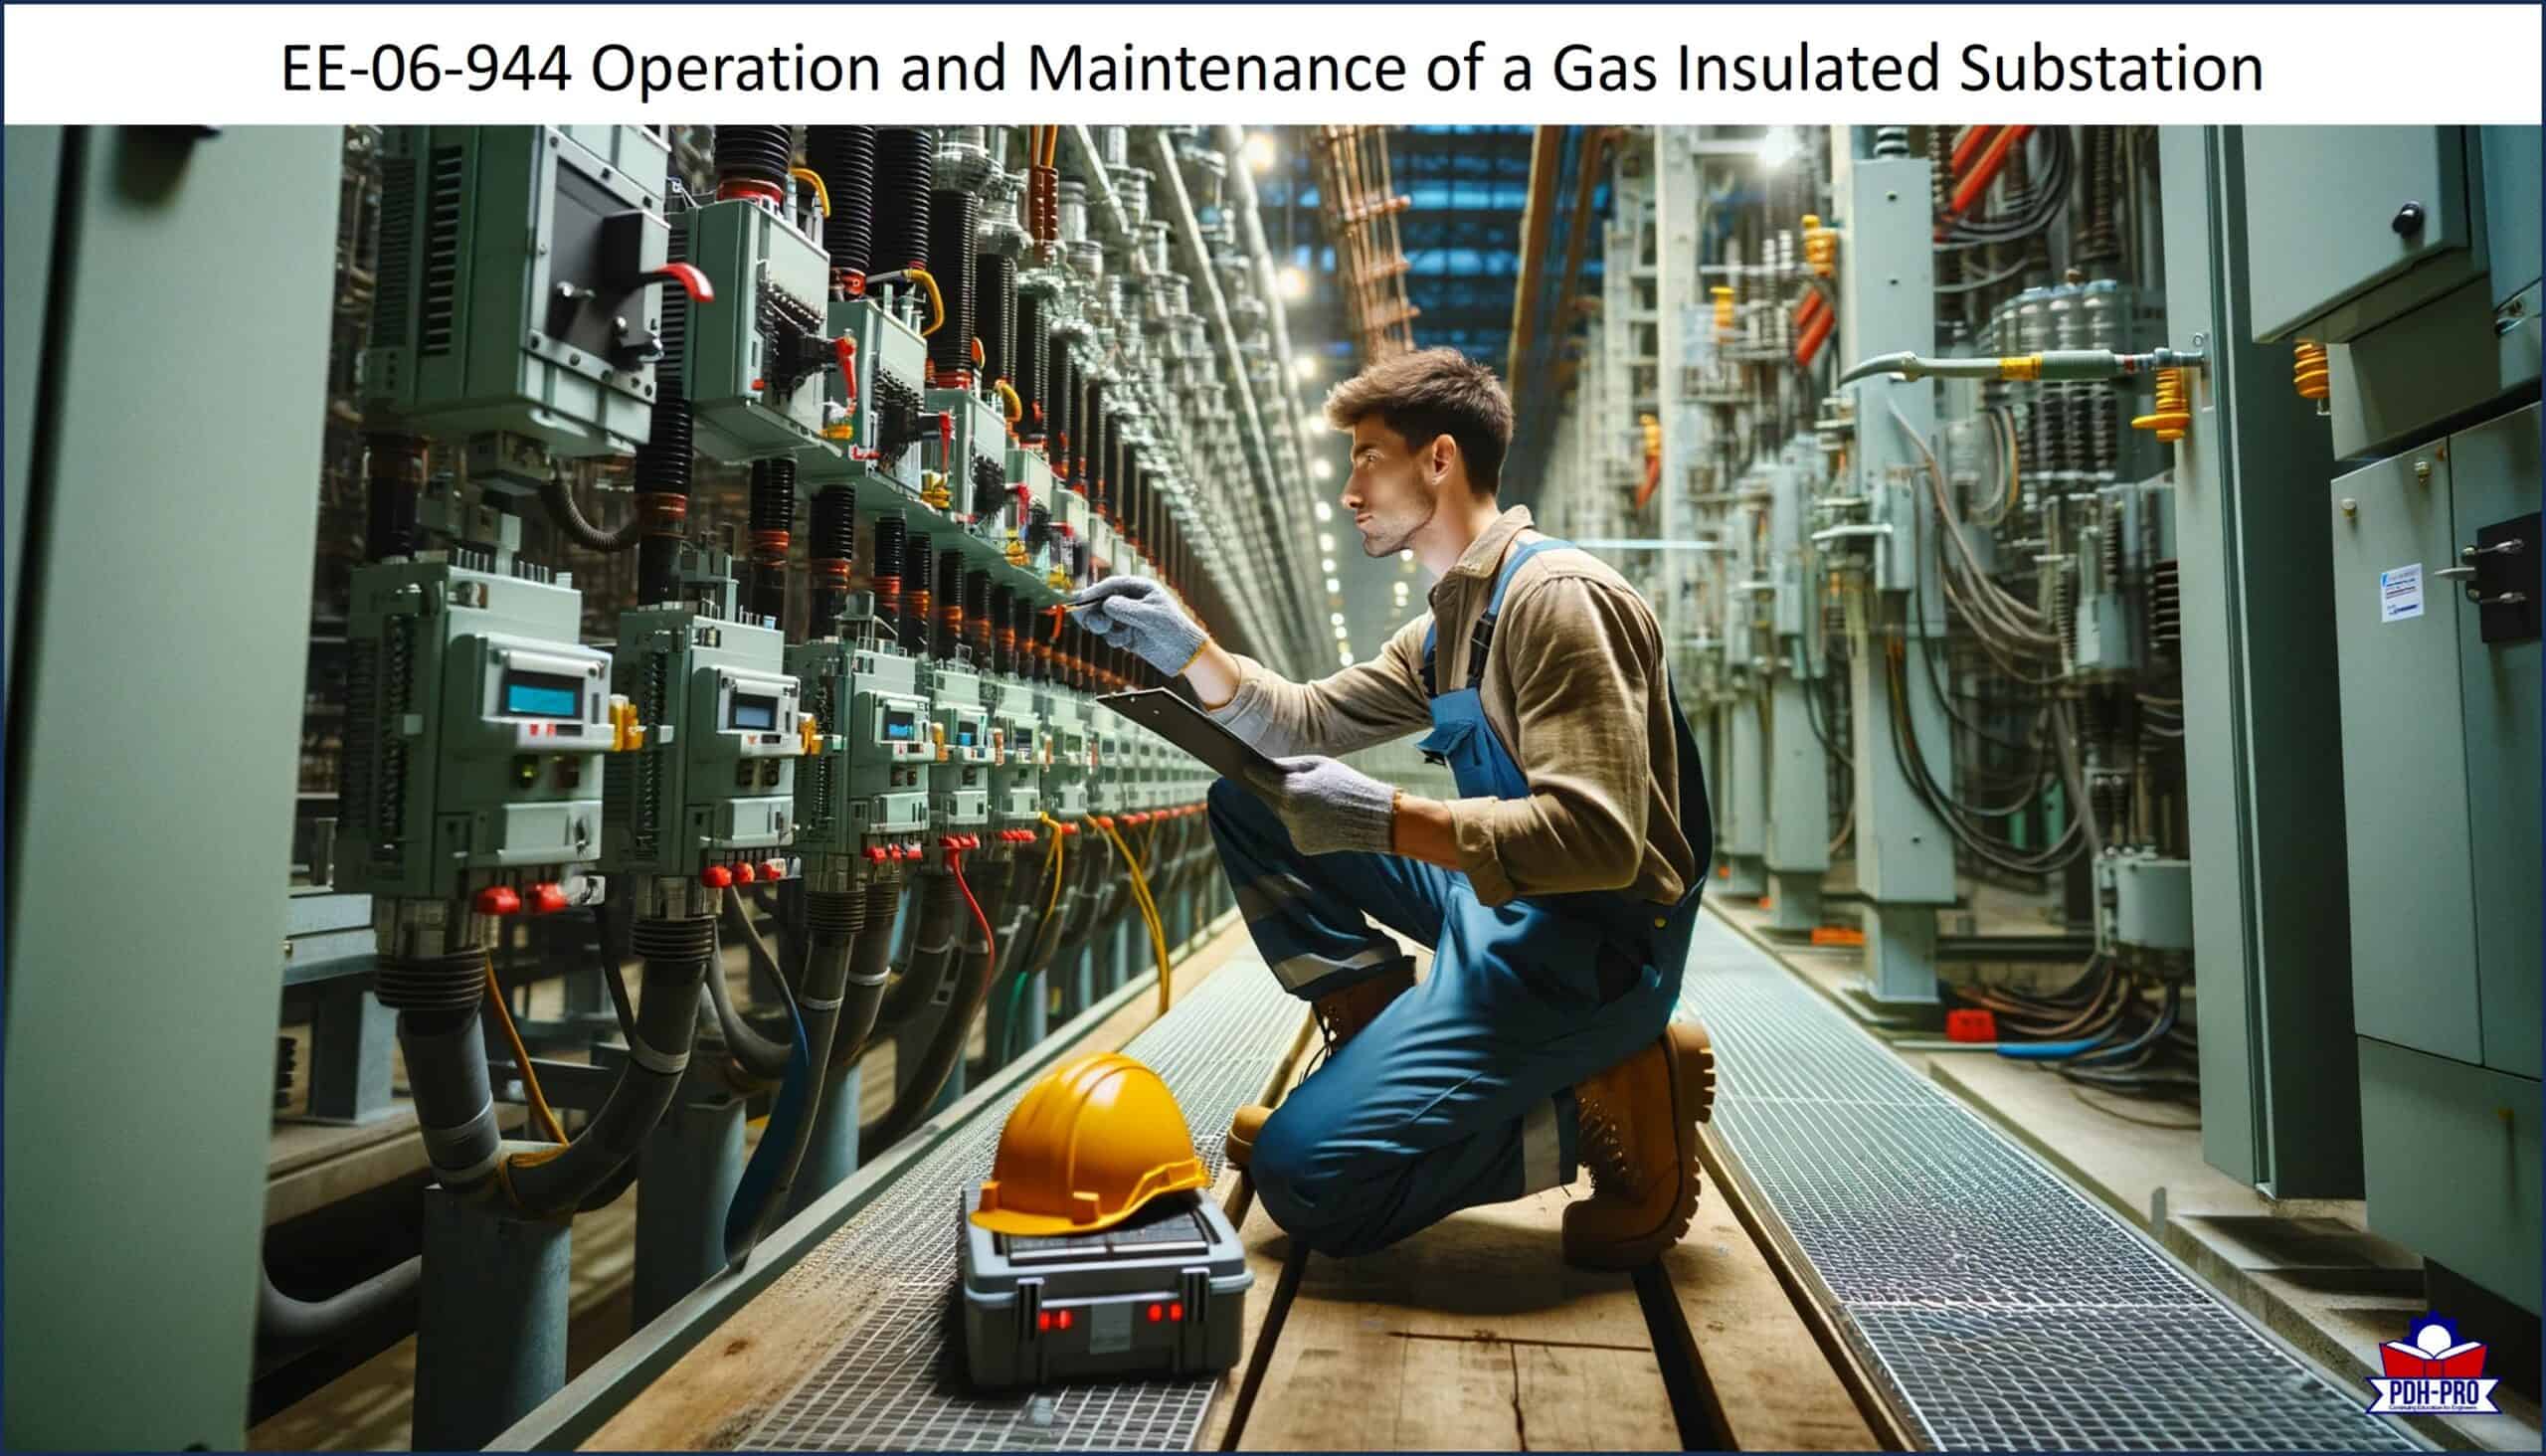 Operation and Maintenance of a Gas Insulated Substation